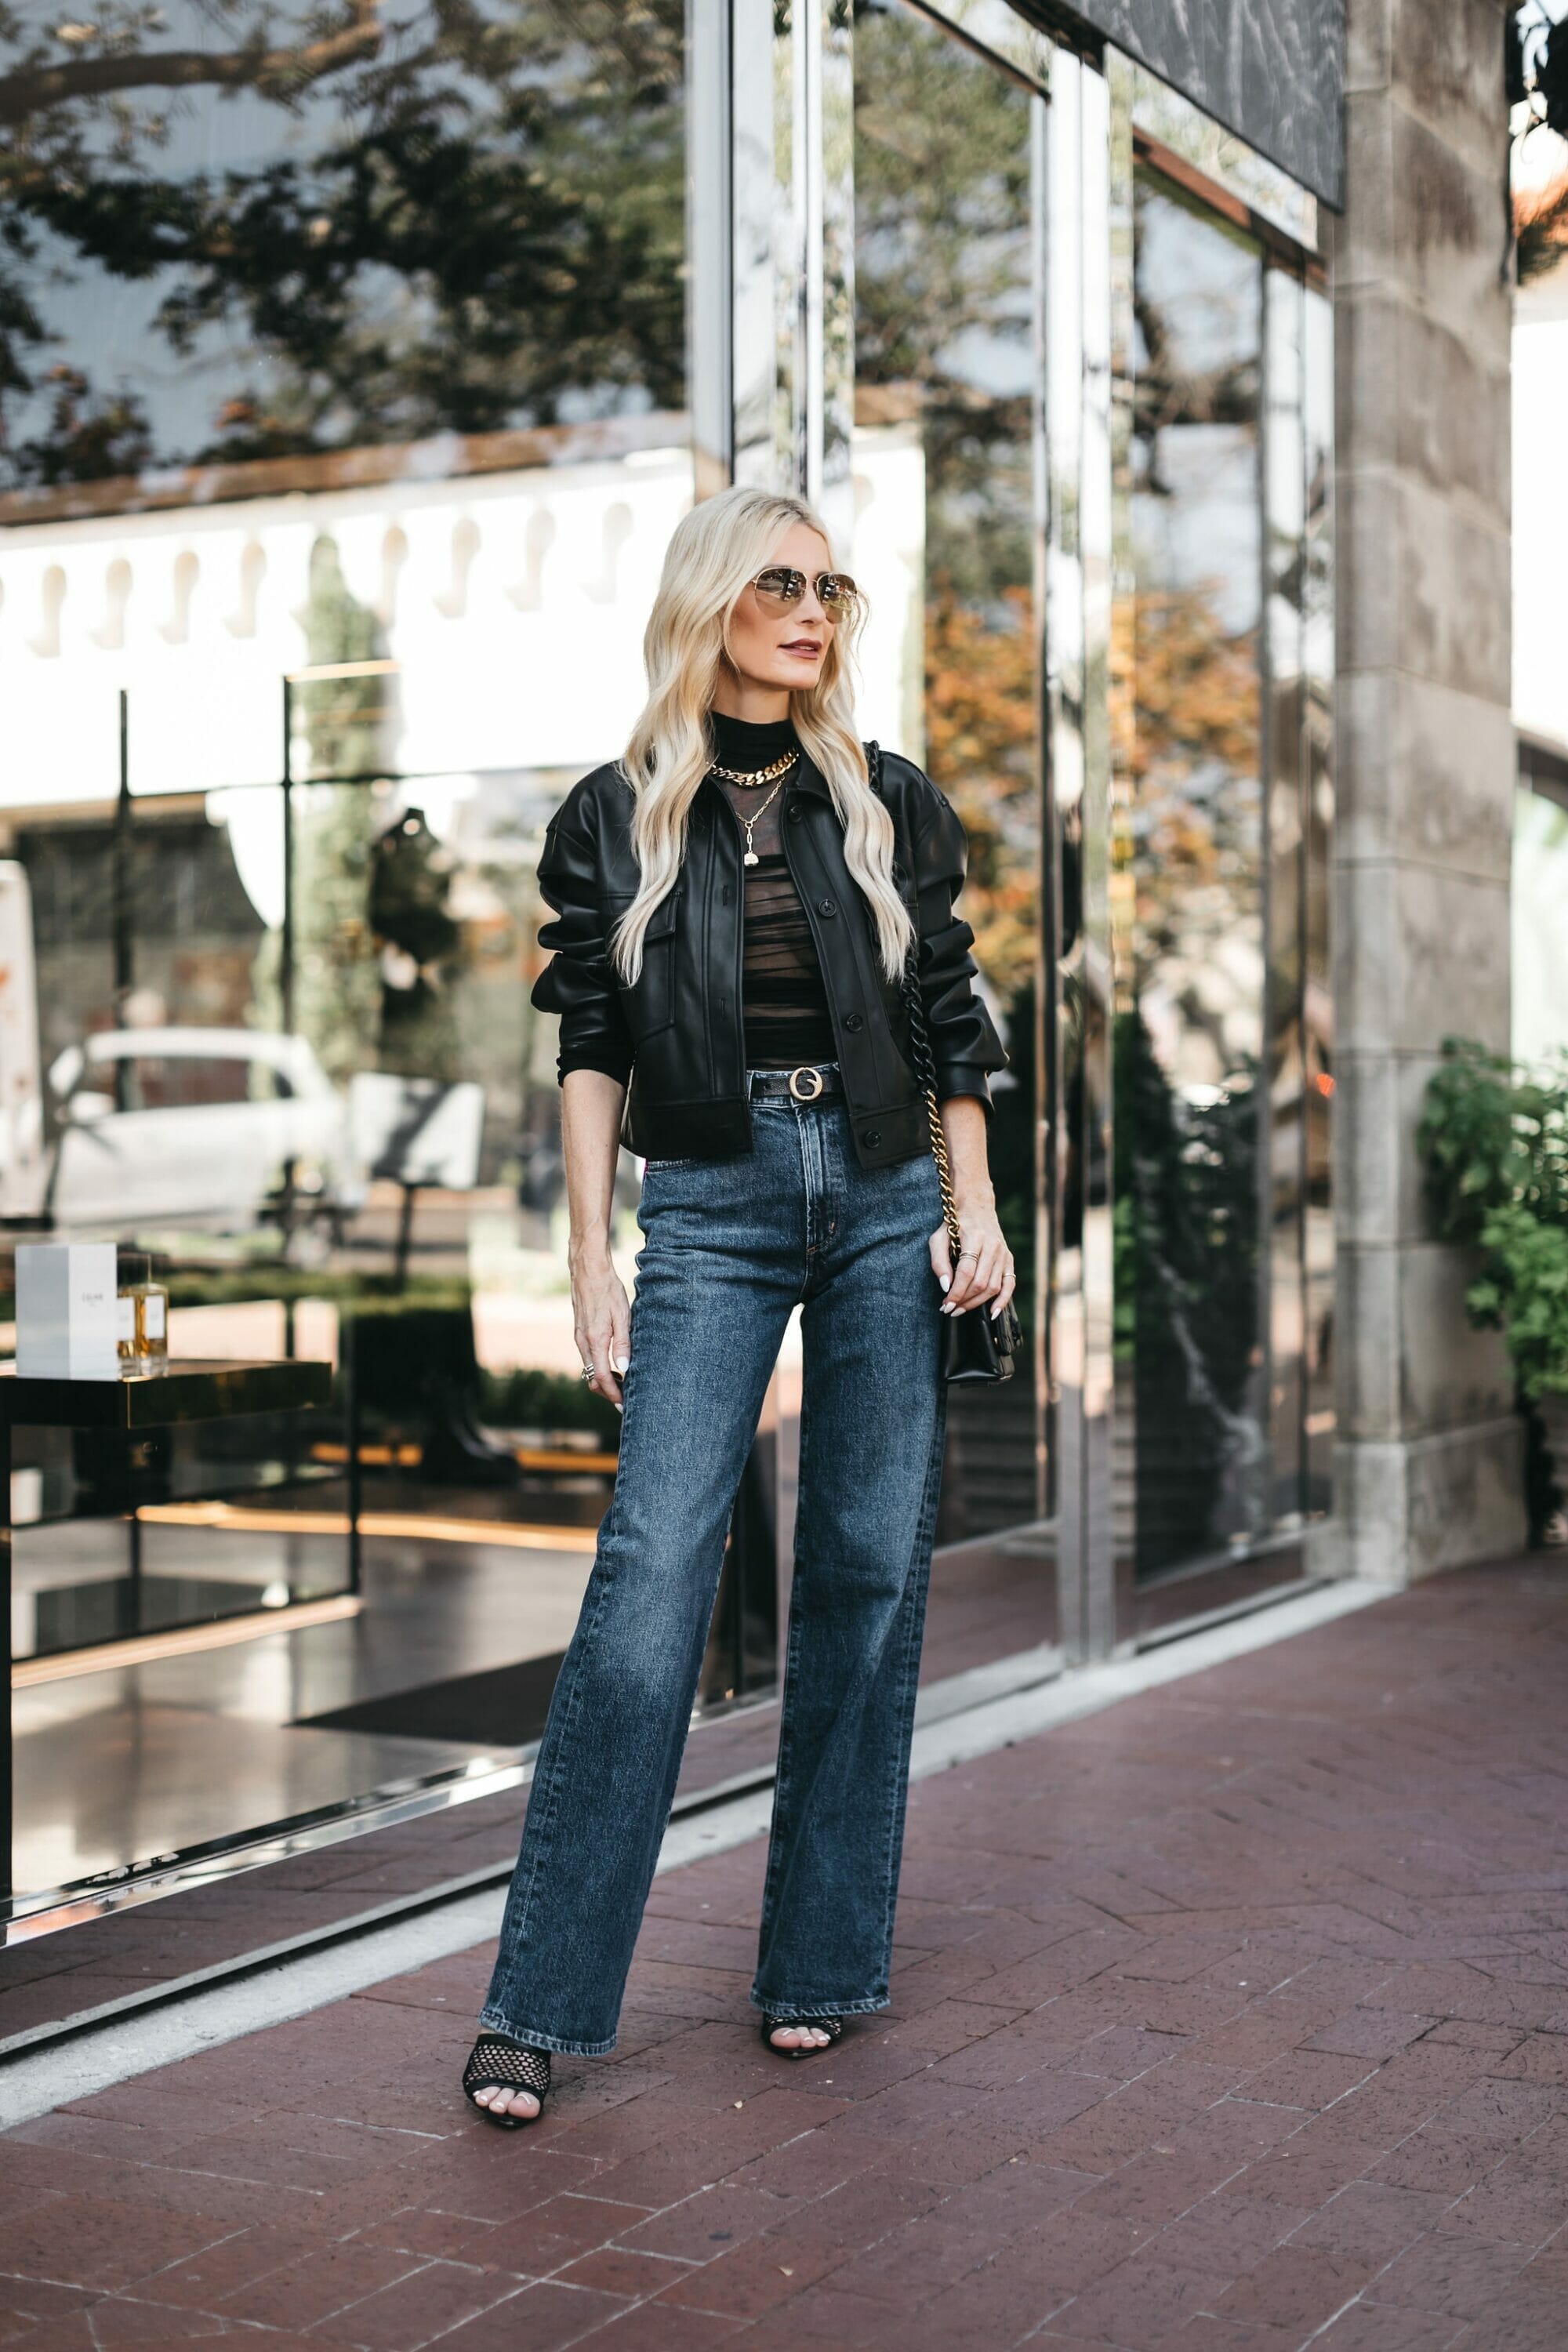 Over 40 fashion blogger showcasing 5 of fall's hottest denim trends.